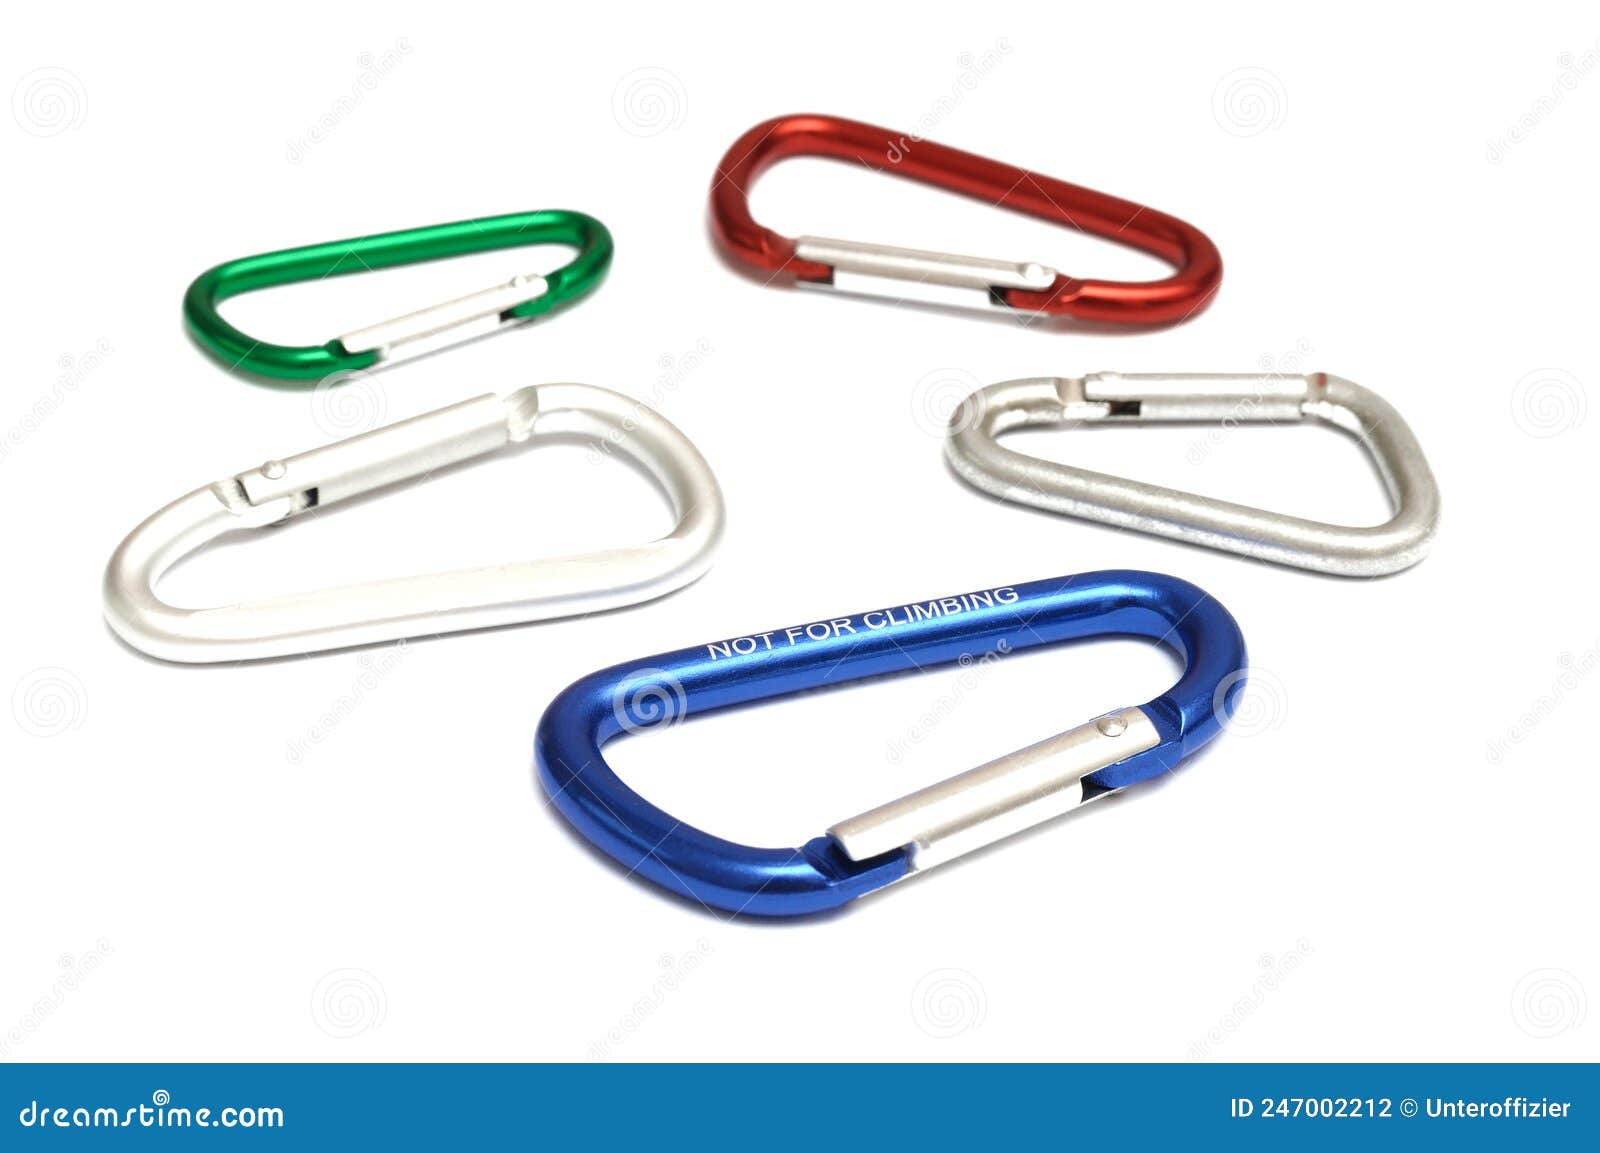 a few carabiners of different sizes and colours against a white backdrop